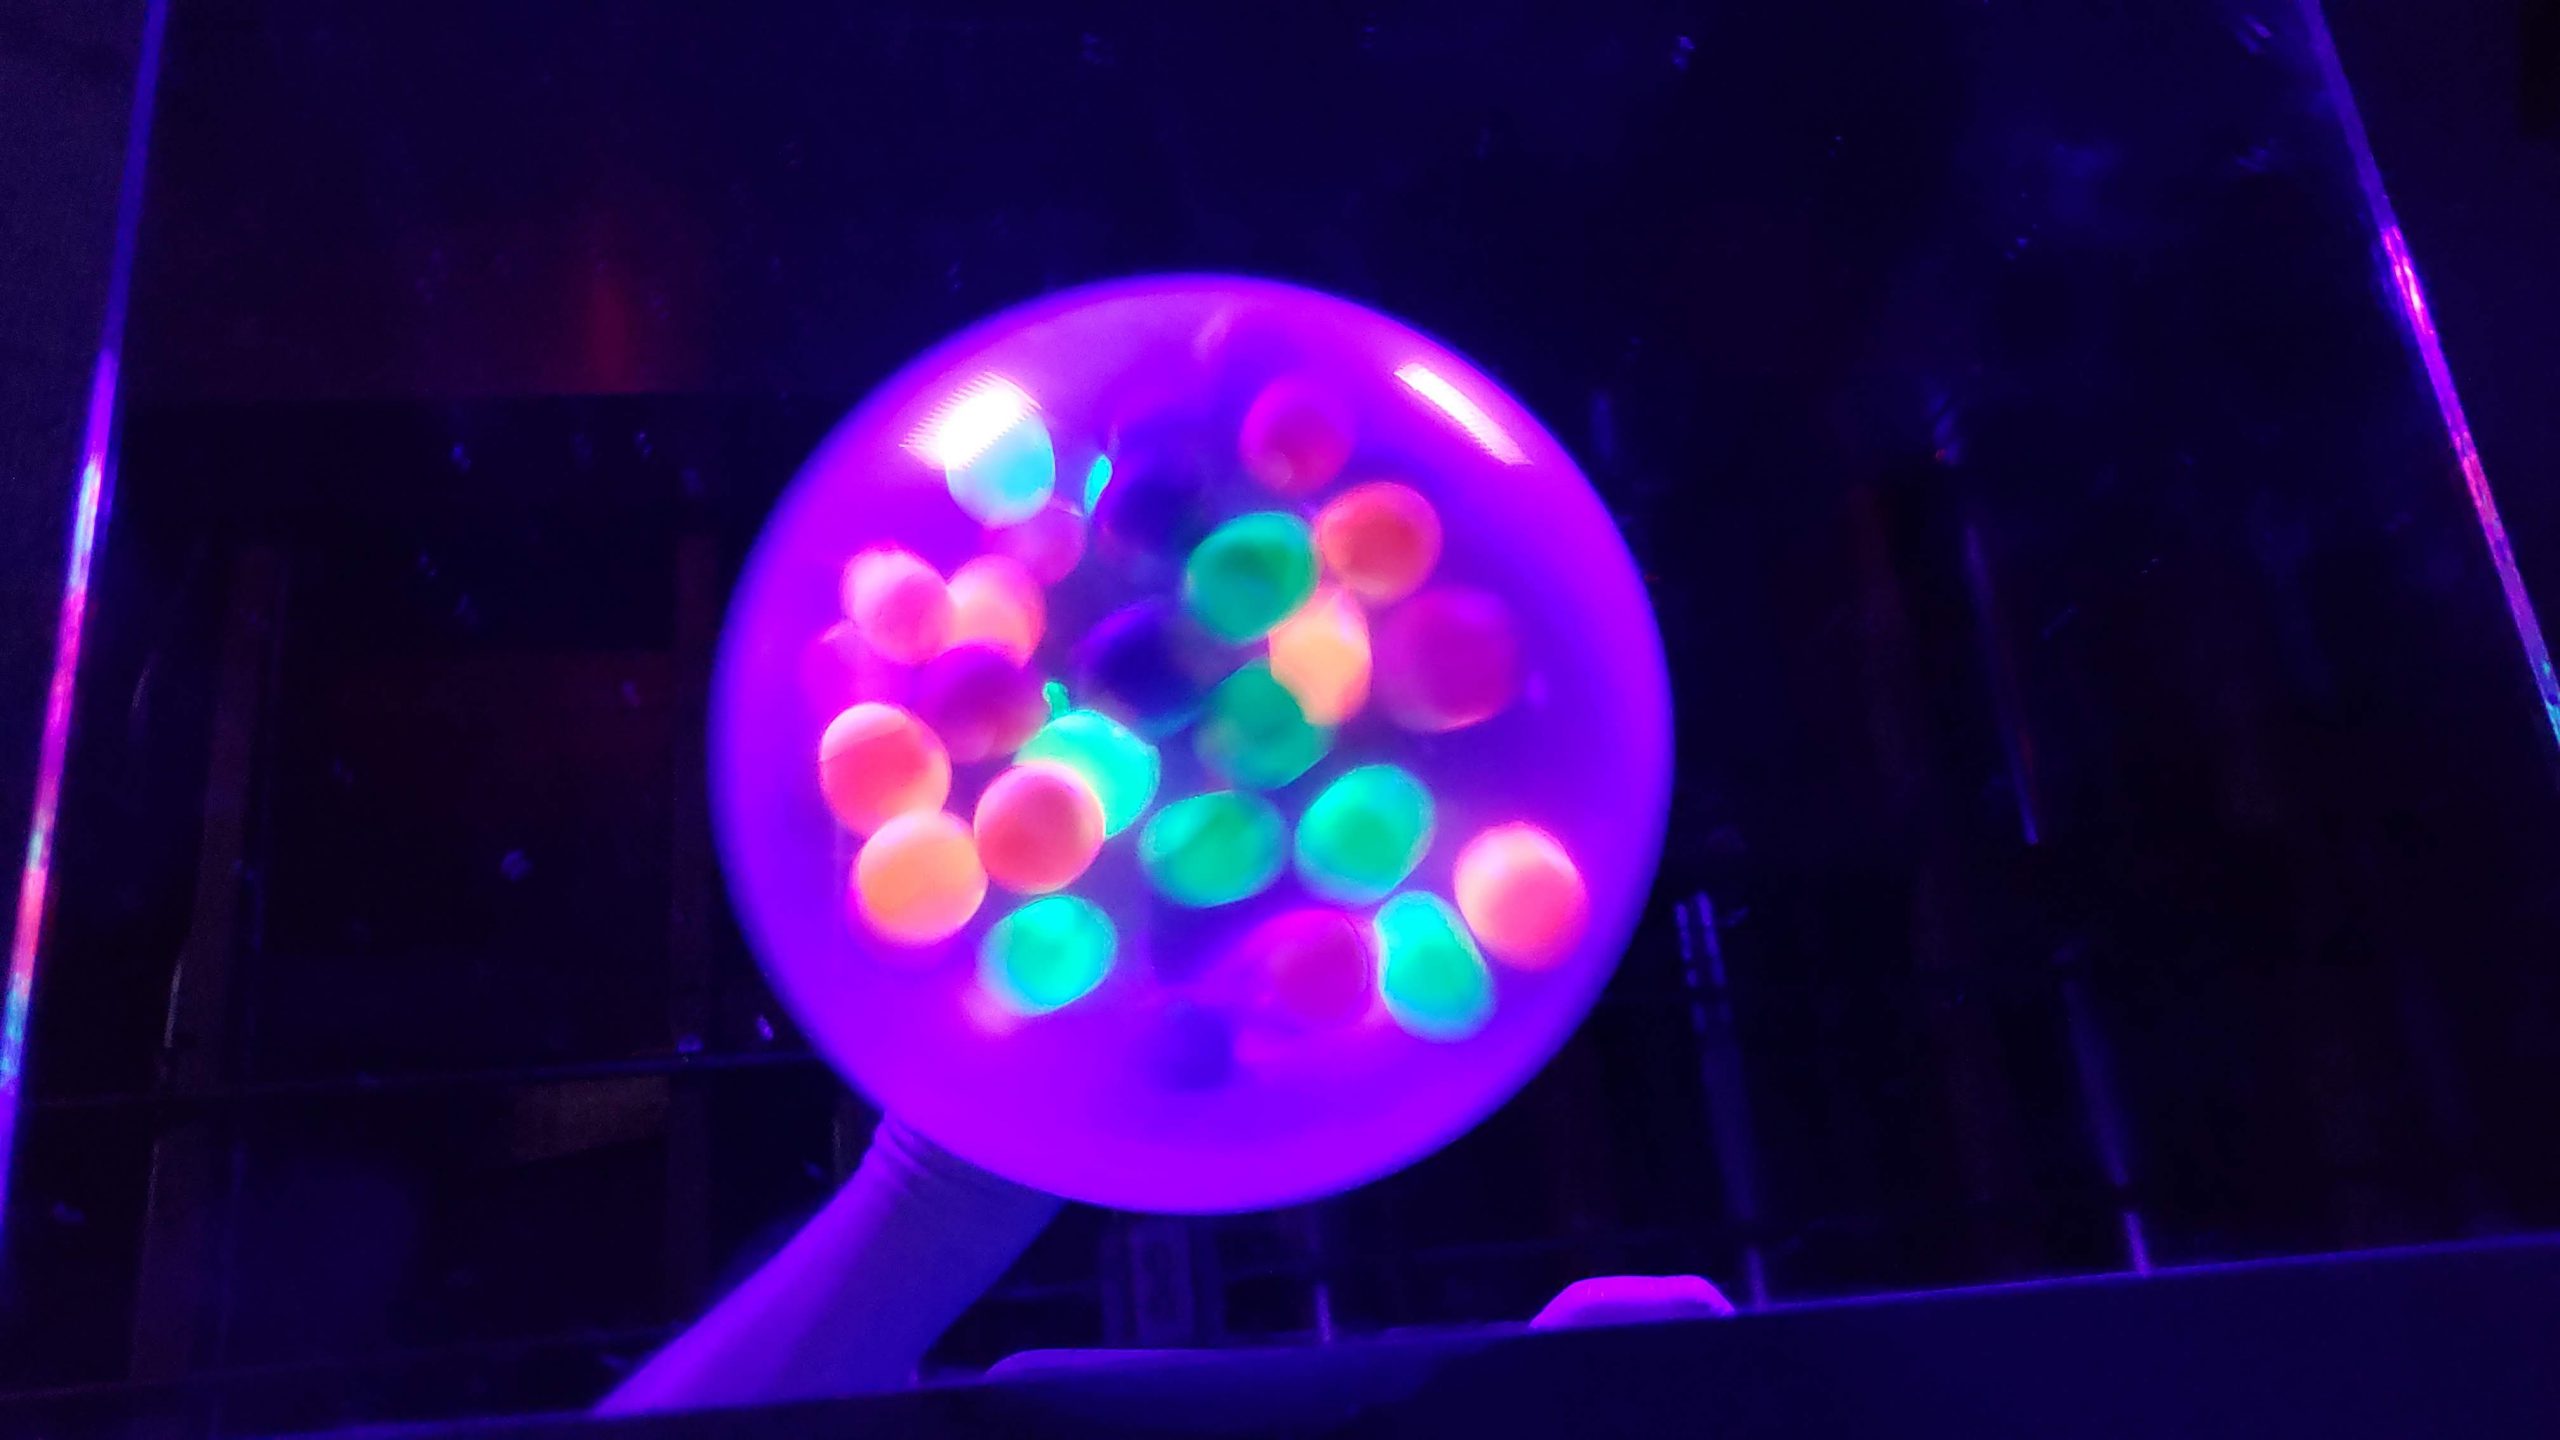 A cool effect with blacklight and neon balloon that create a cool balloon effect.